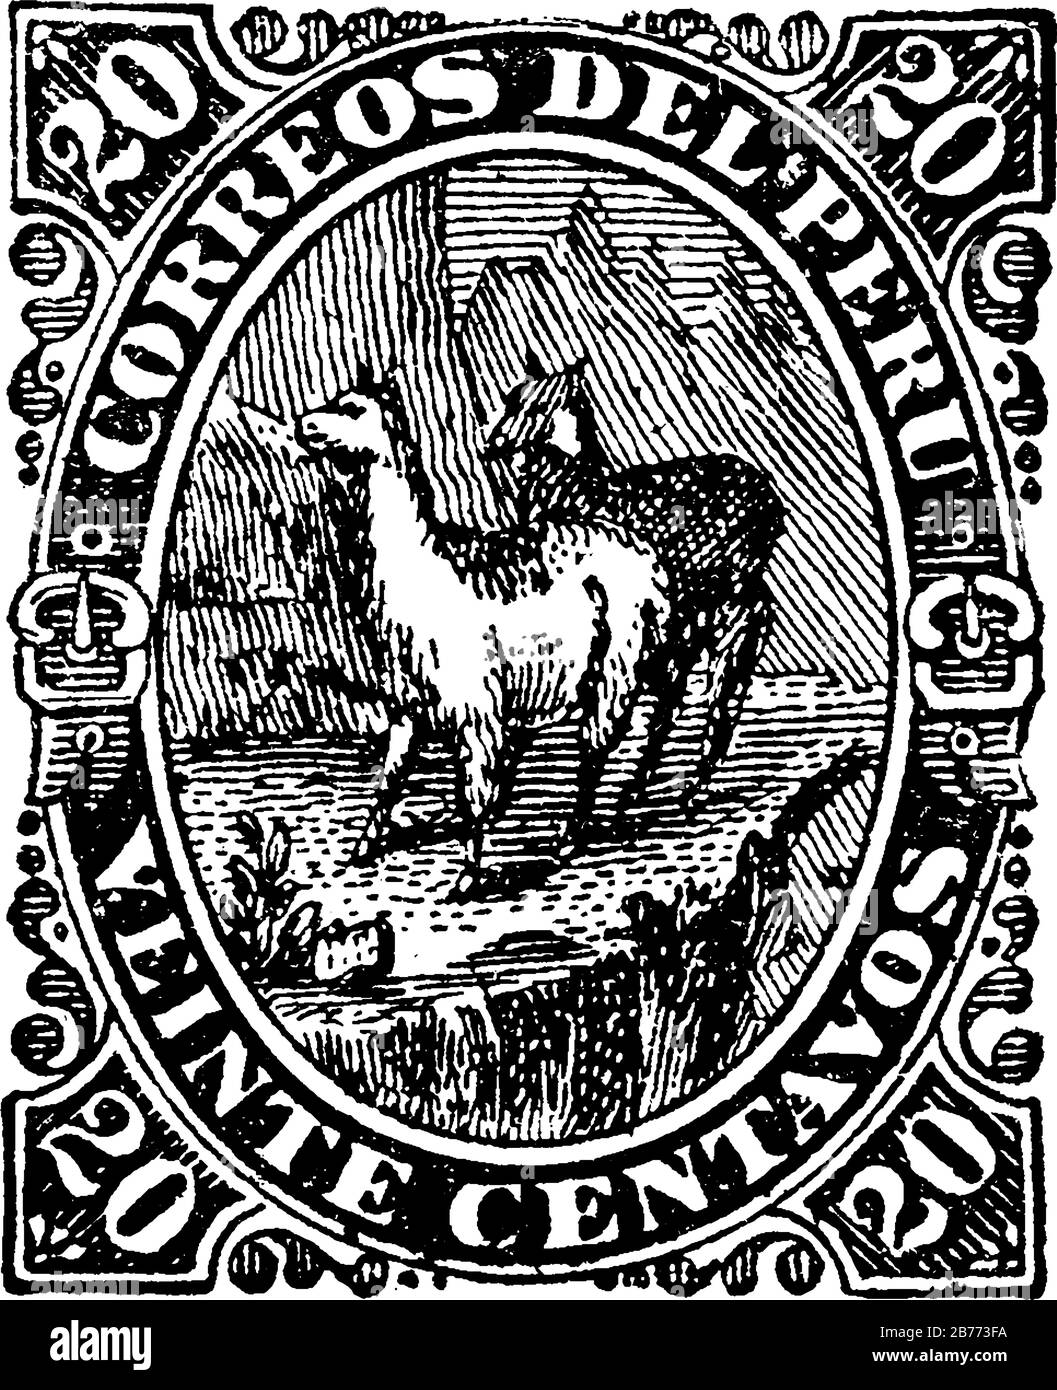 Peru Stamp (20 centavos) from 1866-1867, a small adhesive piece of paper was stuck to something to show an amount of money paid, mainly a postage stam Stock Vector